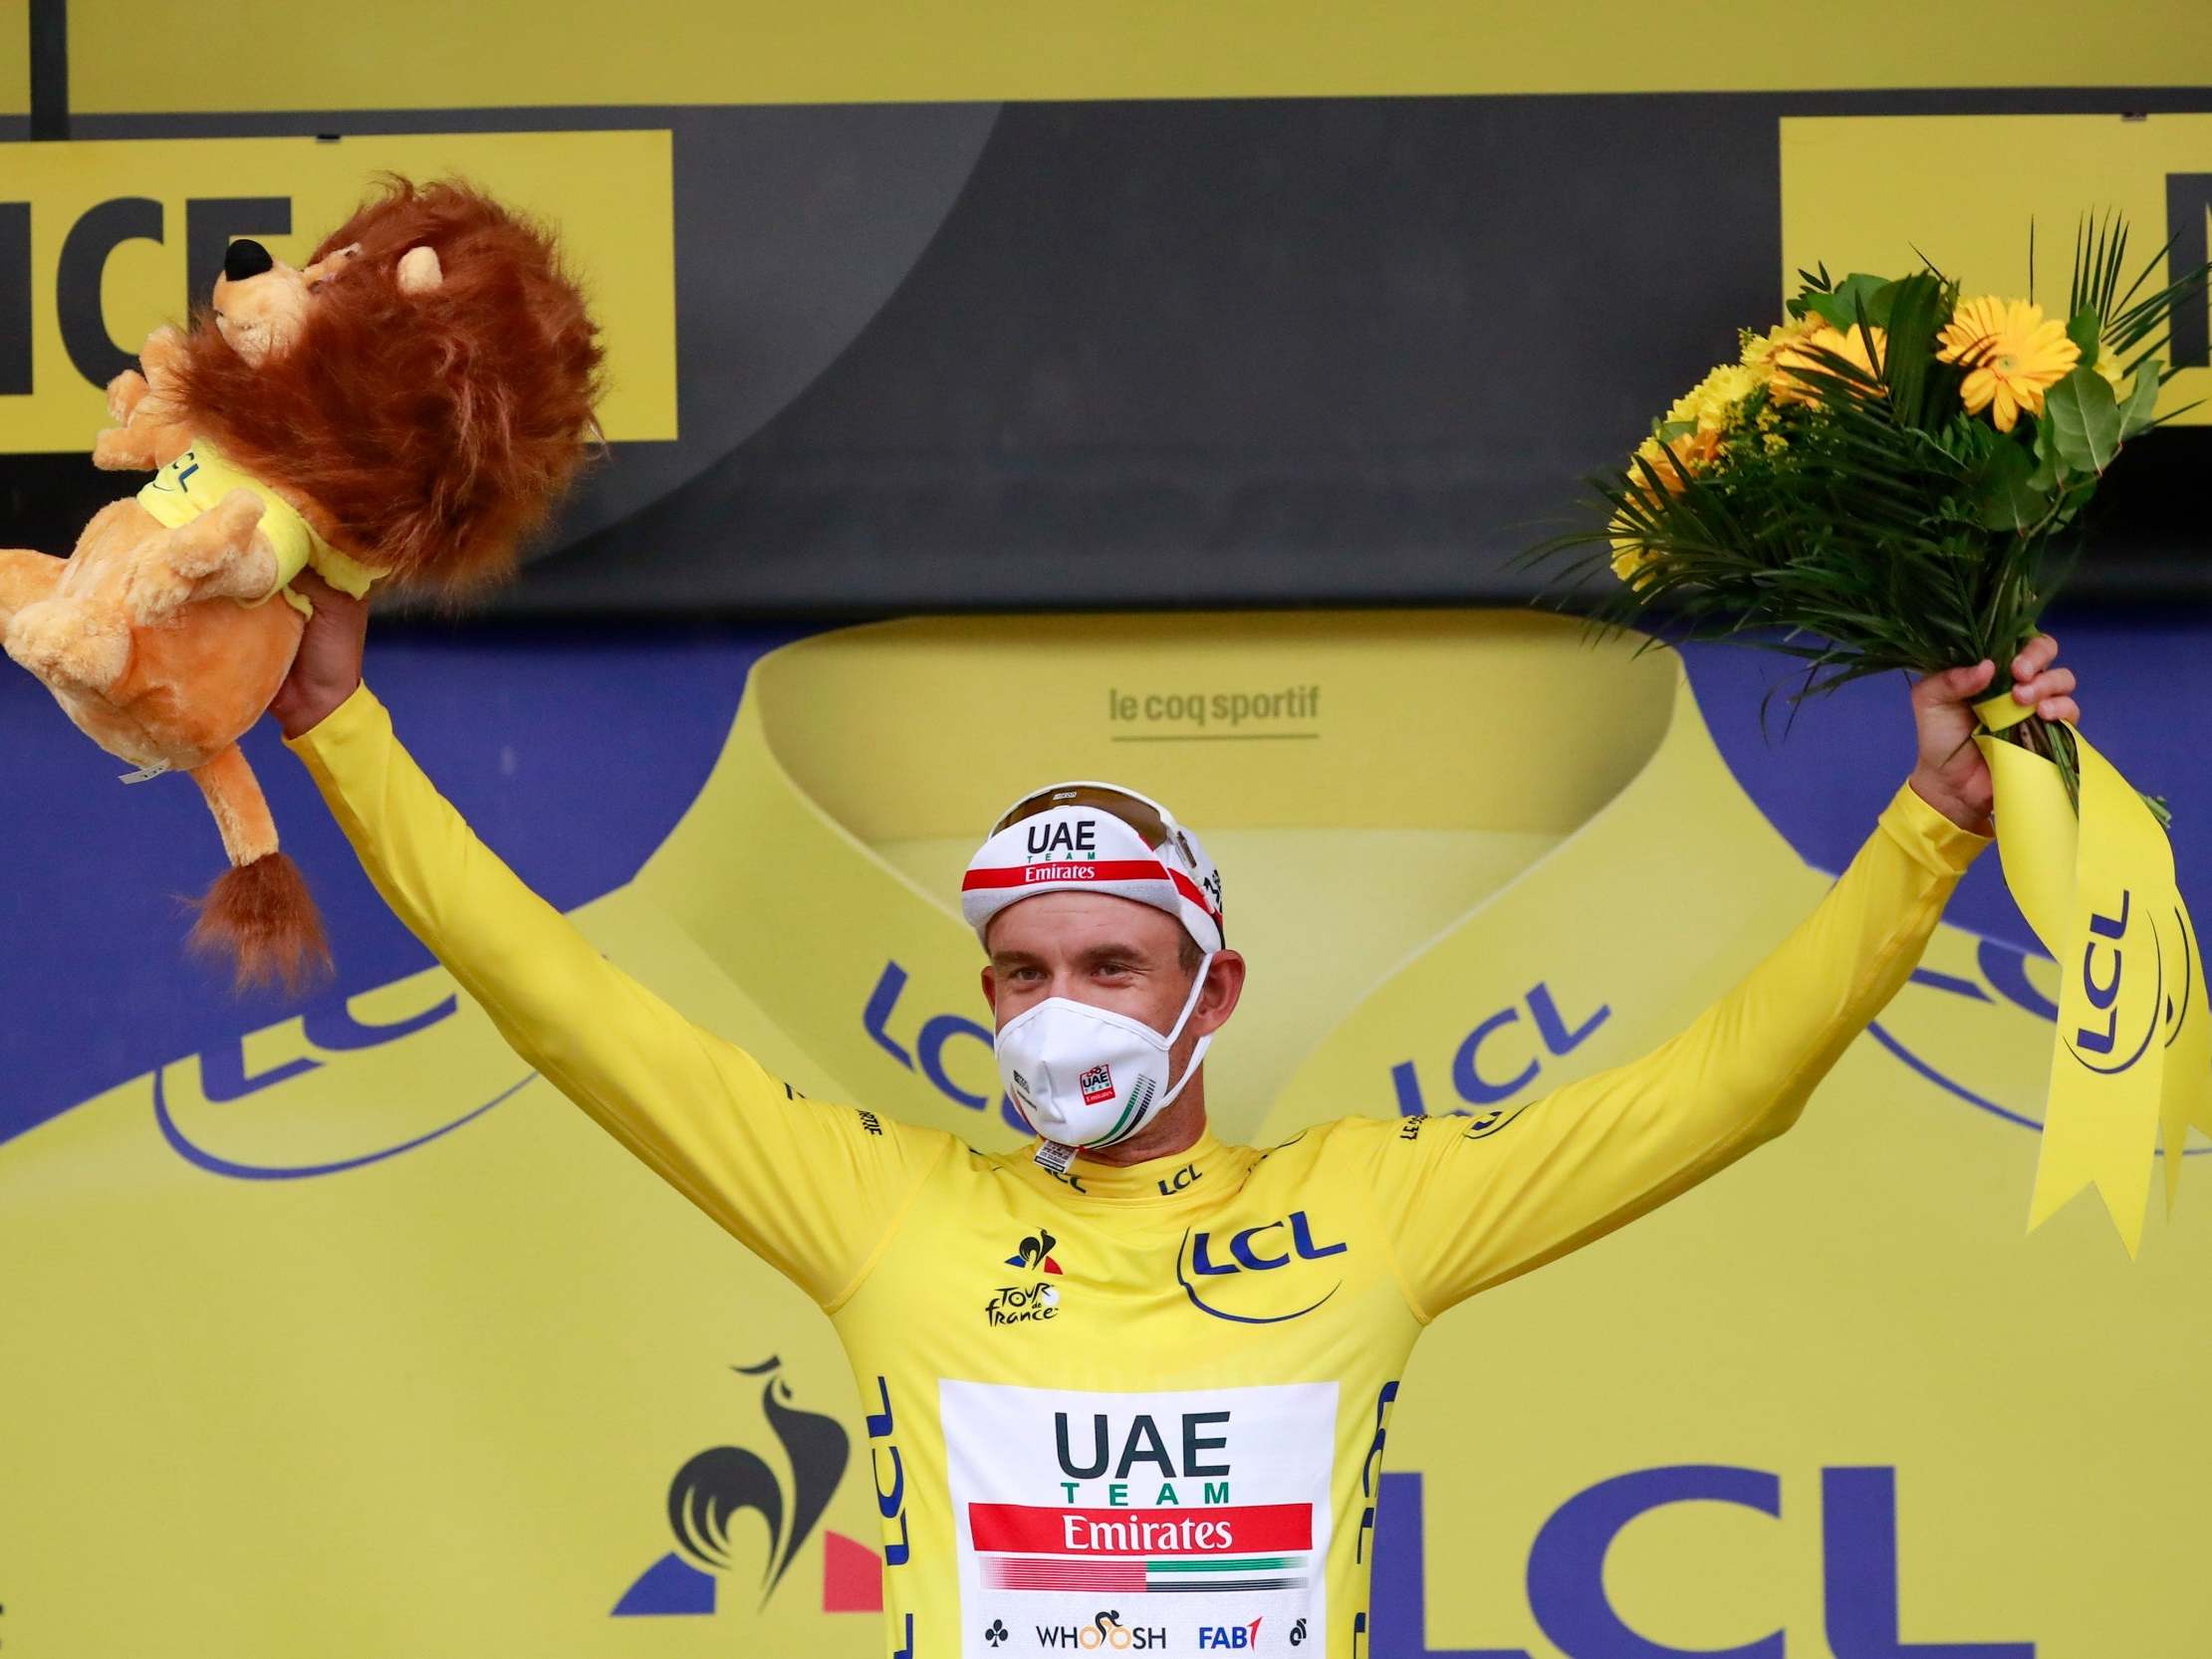 Alexander Kristoff takes the yellow jersey into day two of the Tour de France